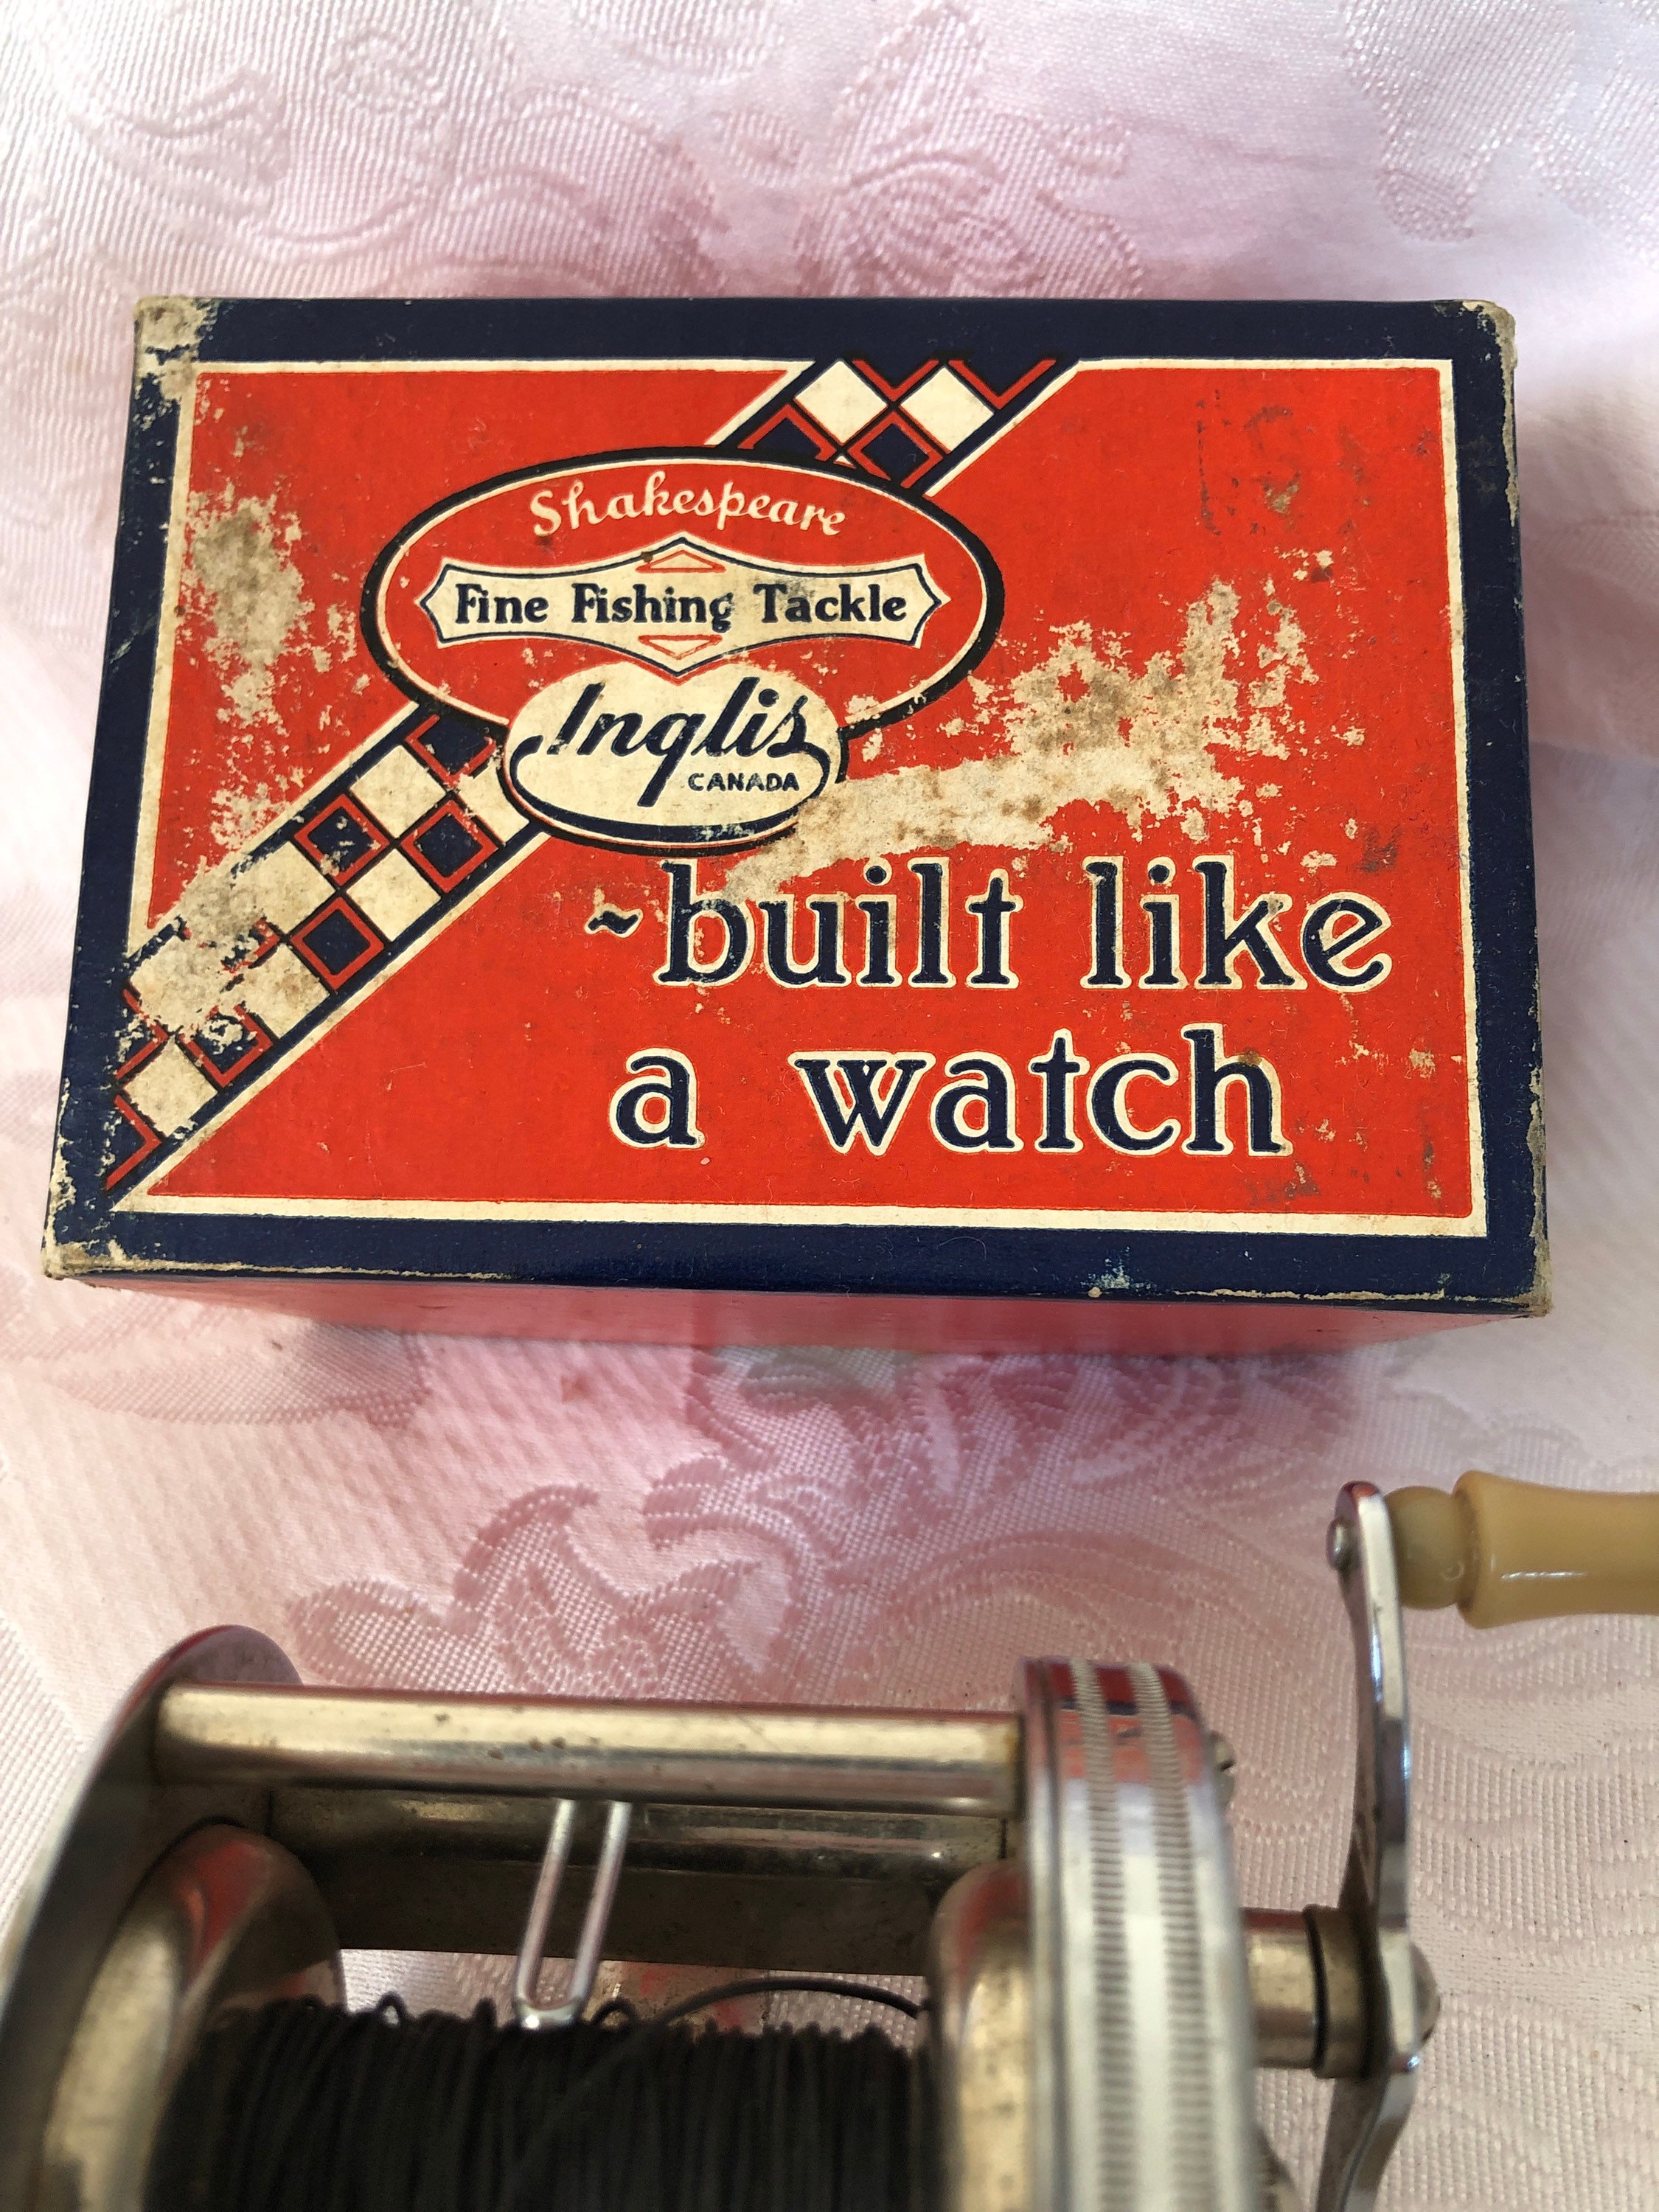 Vintage Shakespeare Level Winding Reel Date1956 Toronto by Inglis. Preowned  Good Condition. Original Box a Fantastic Fishing Display Reel. -  Israel